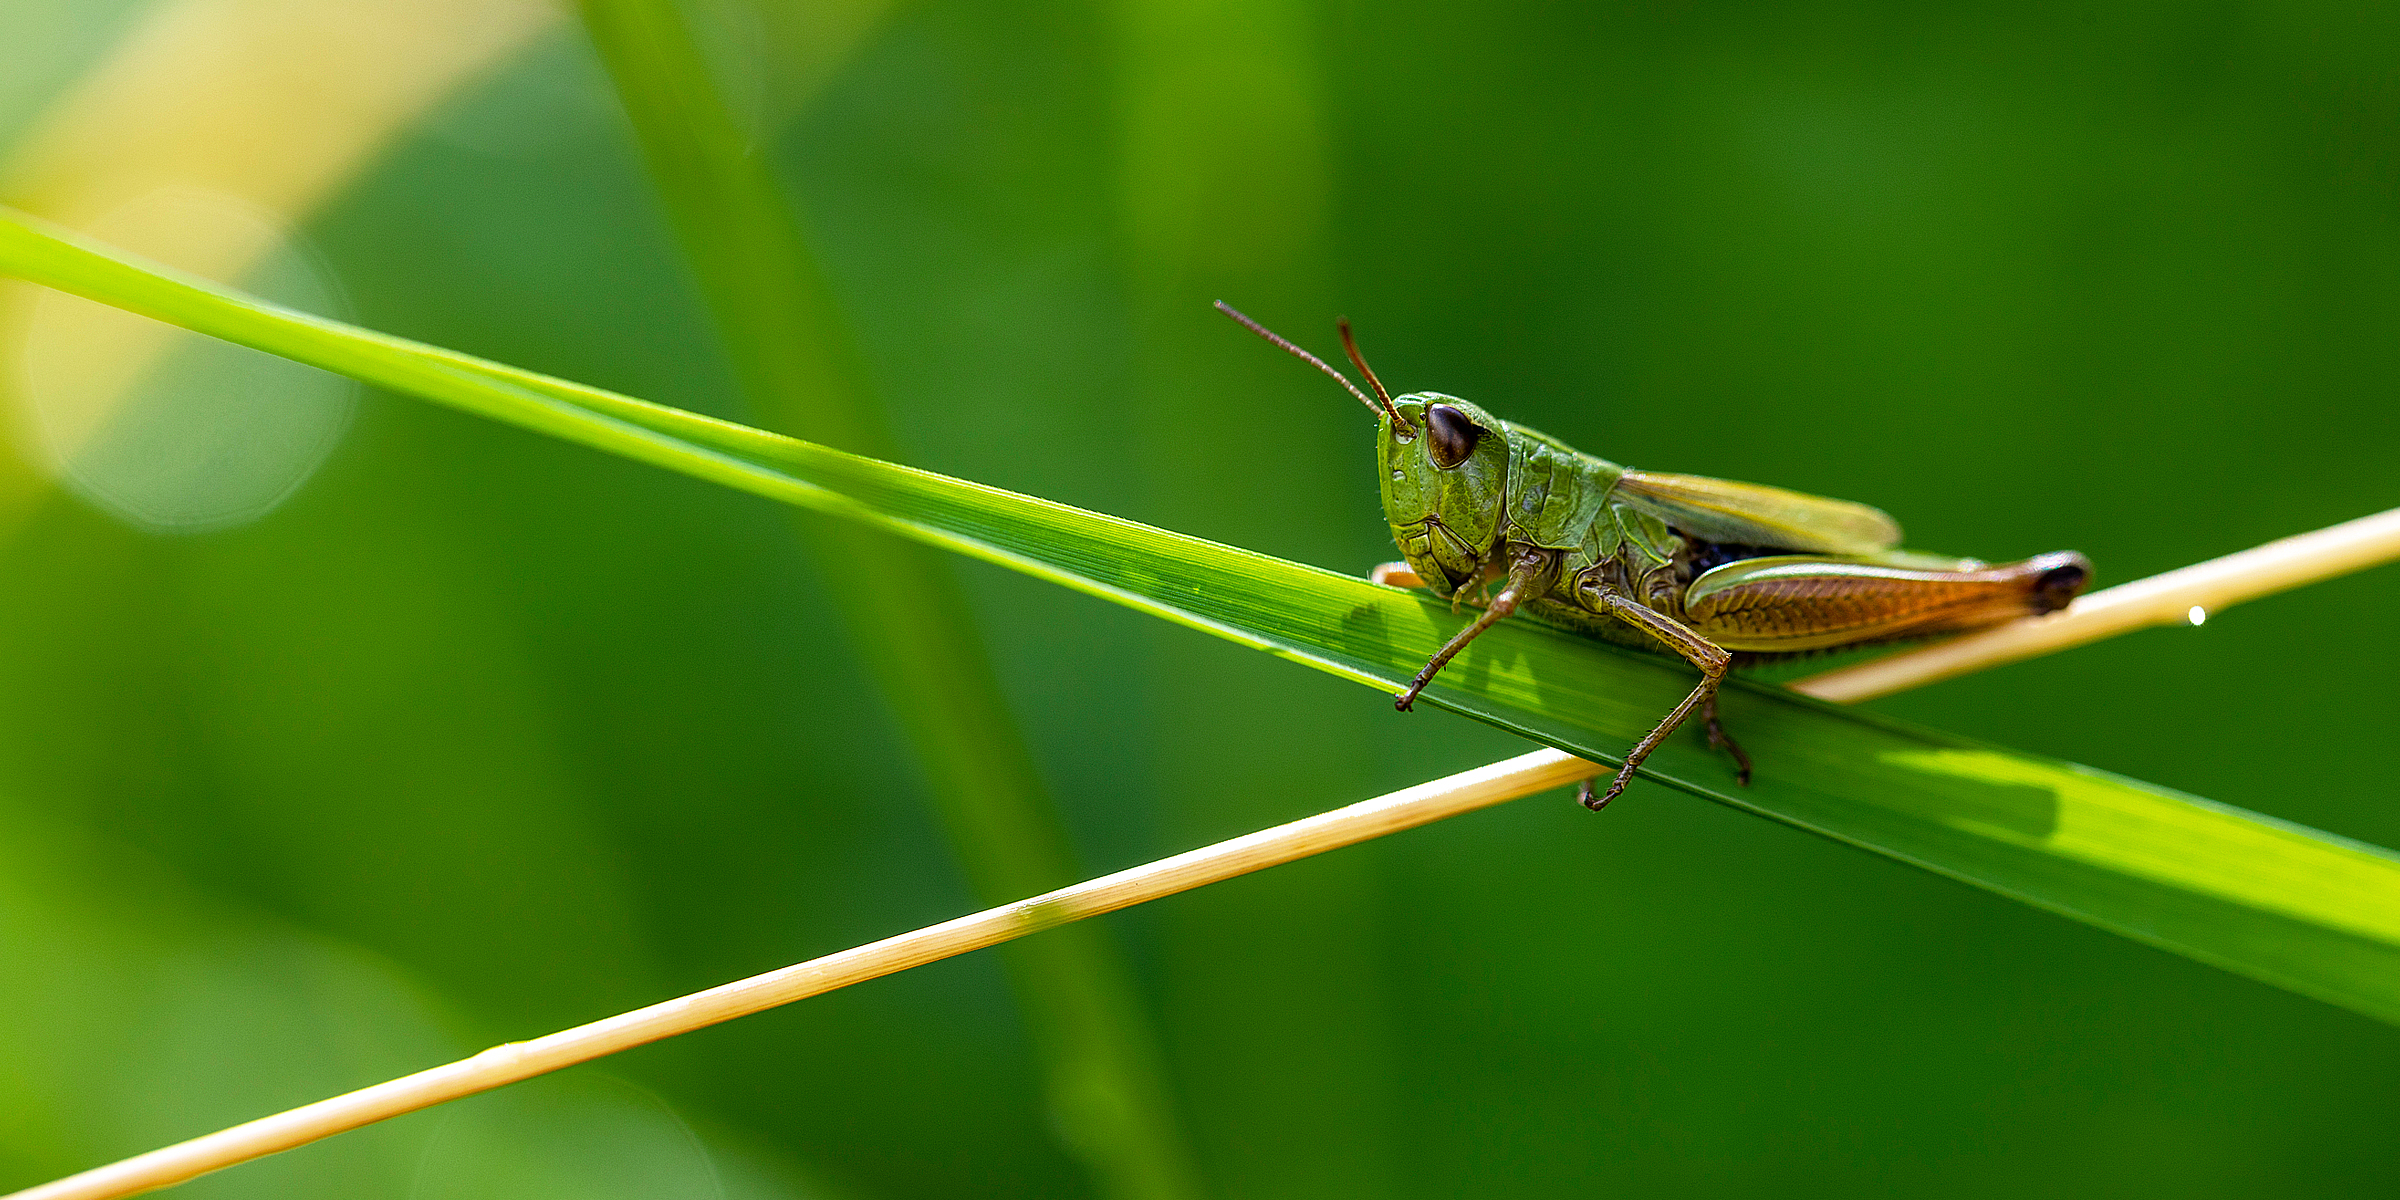 Close-up shot of a cricket on a green leaf | Source: Shutterstock